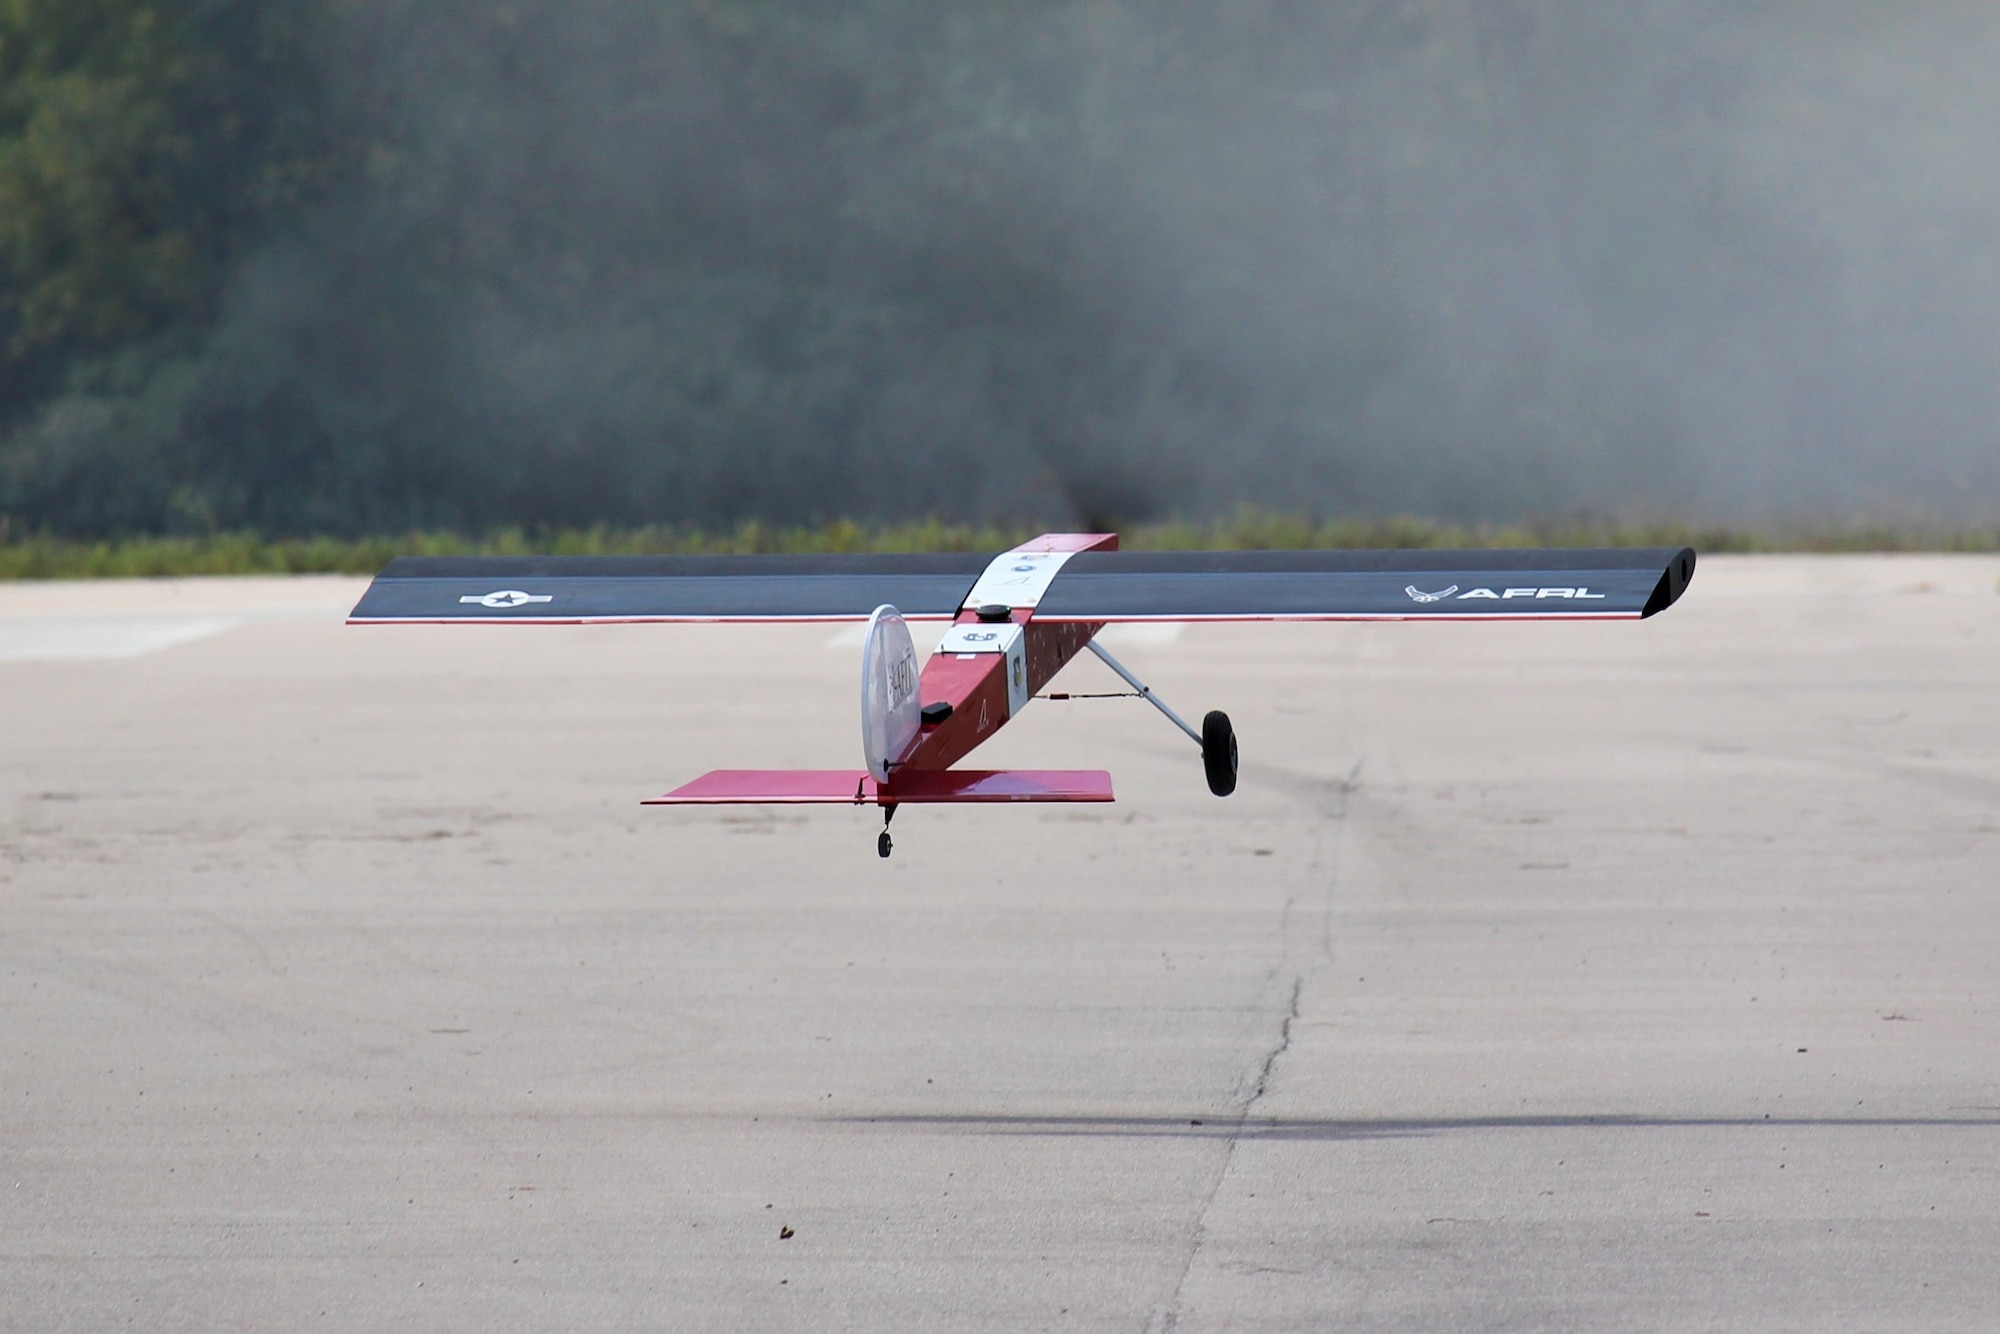 The Air Force Research Laboratory-developed Variable Camber Compliant Wing successfully completed a series of flight experiments in September and October of 2019. This unique wing concept changes shape to improve aerodynamic performance and adapt itself to various flight conditions and missions. (U.S. Air Force Photo)